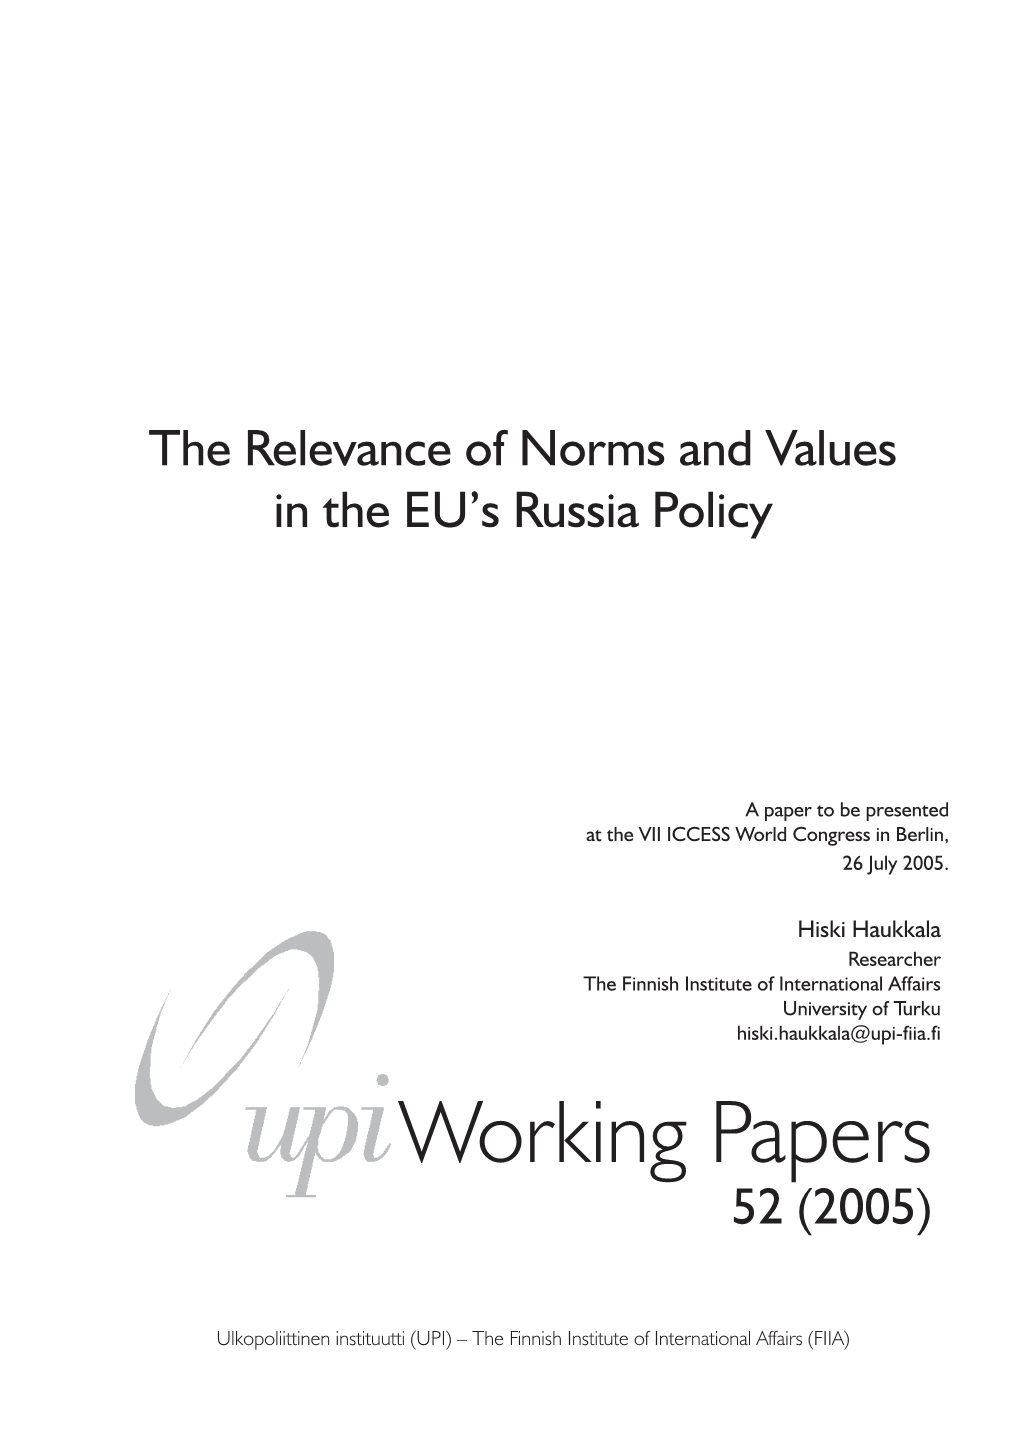 The Relevance of Norms and Values in the EU's Russia Policy